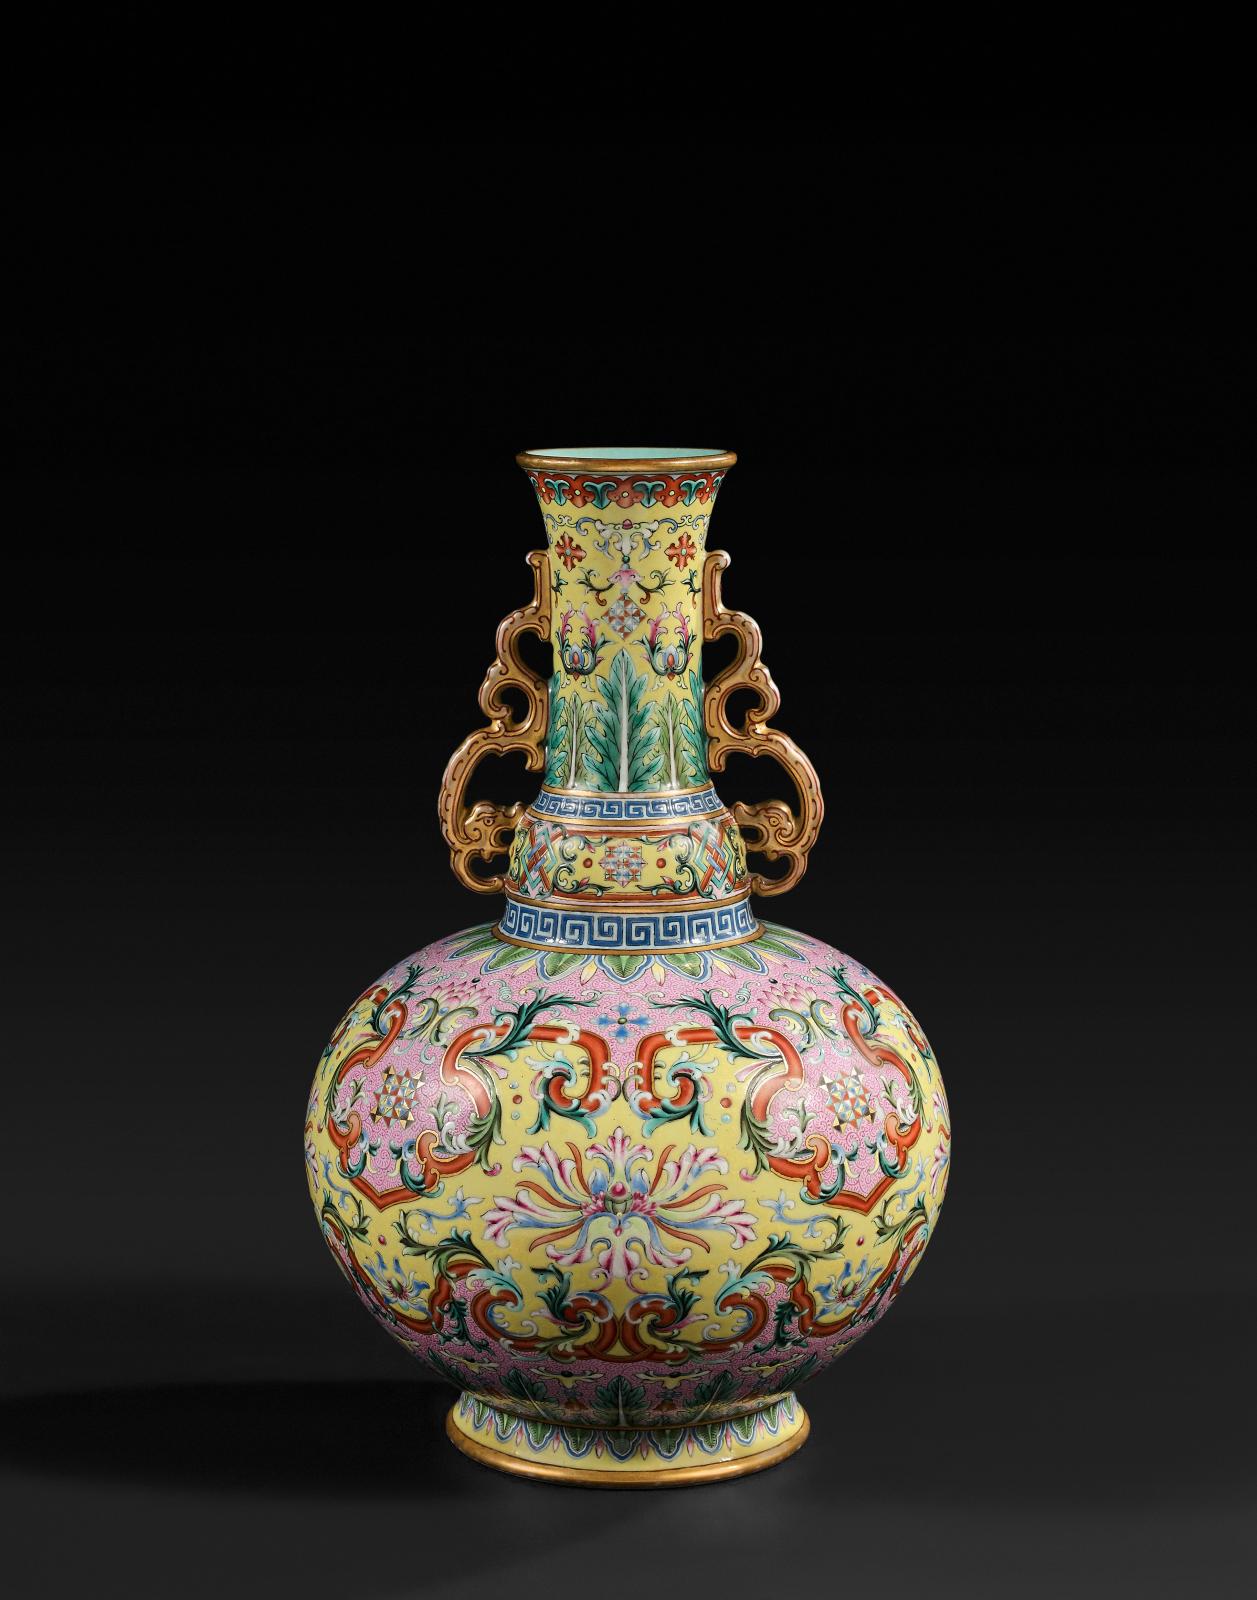 An Imperial Yellow: Gift for Emperor Qianlong?